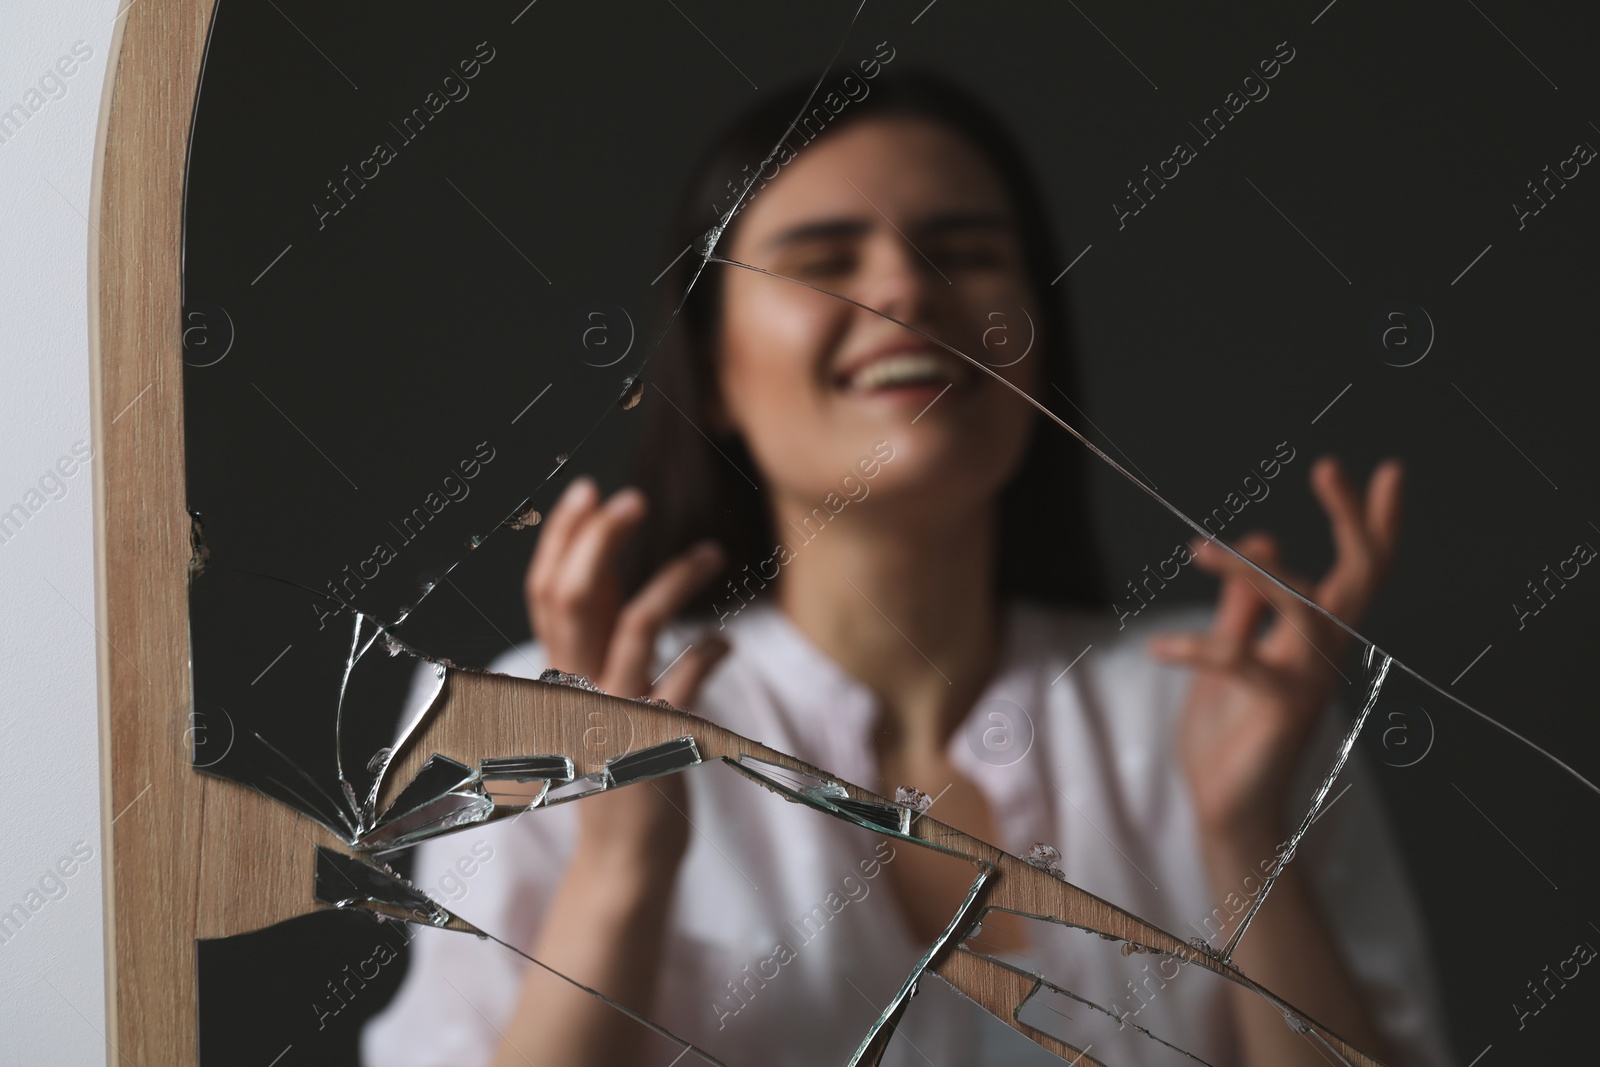 Photo of Blurred reflection of smiling woman in broken mirror